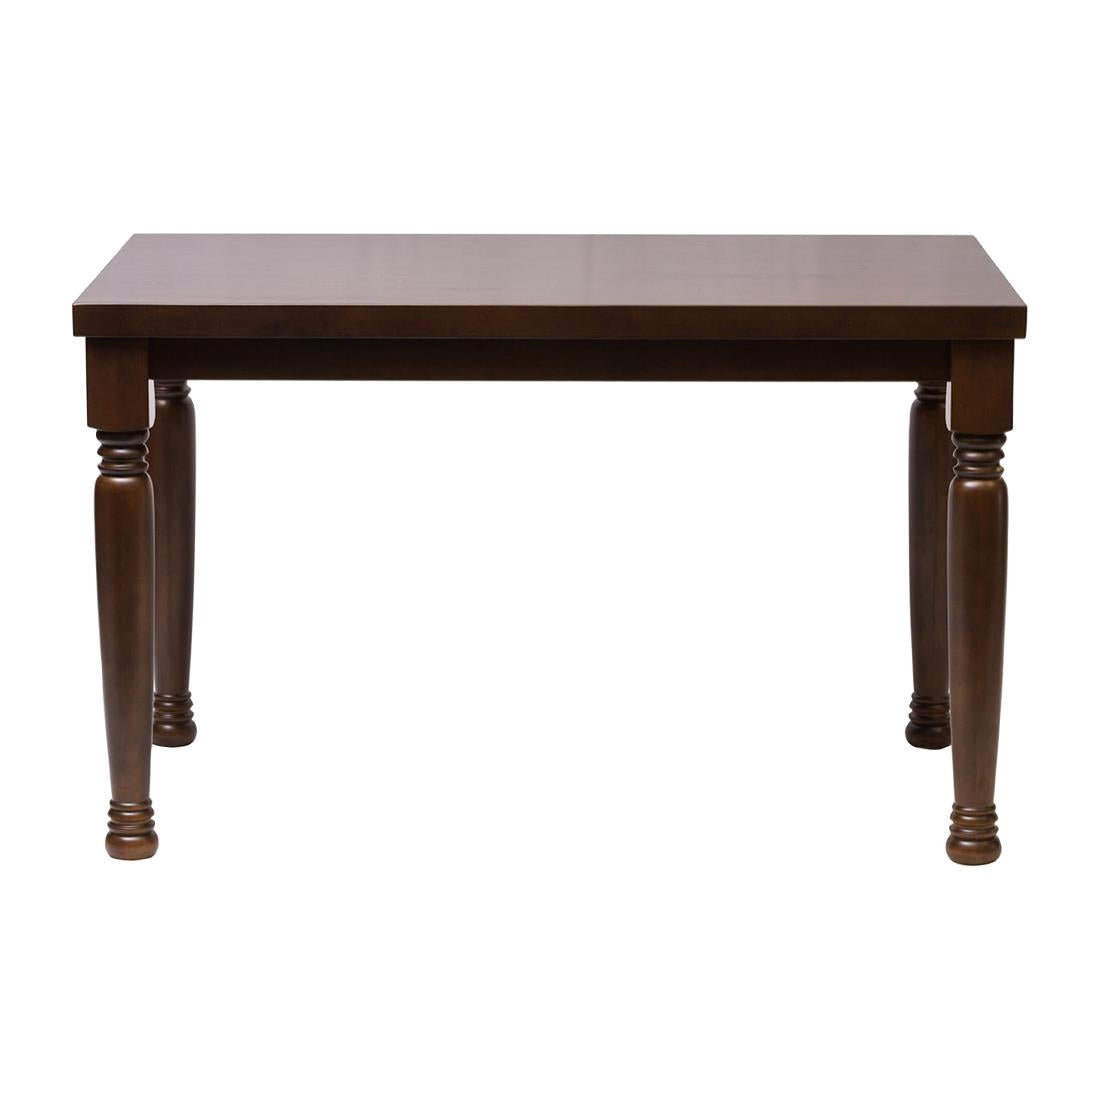 FT493 Cotswold Dark Wood Rectangular Dining Table 1200x700mm JD Catering Equipment Solutions Ltd